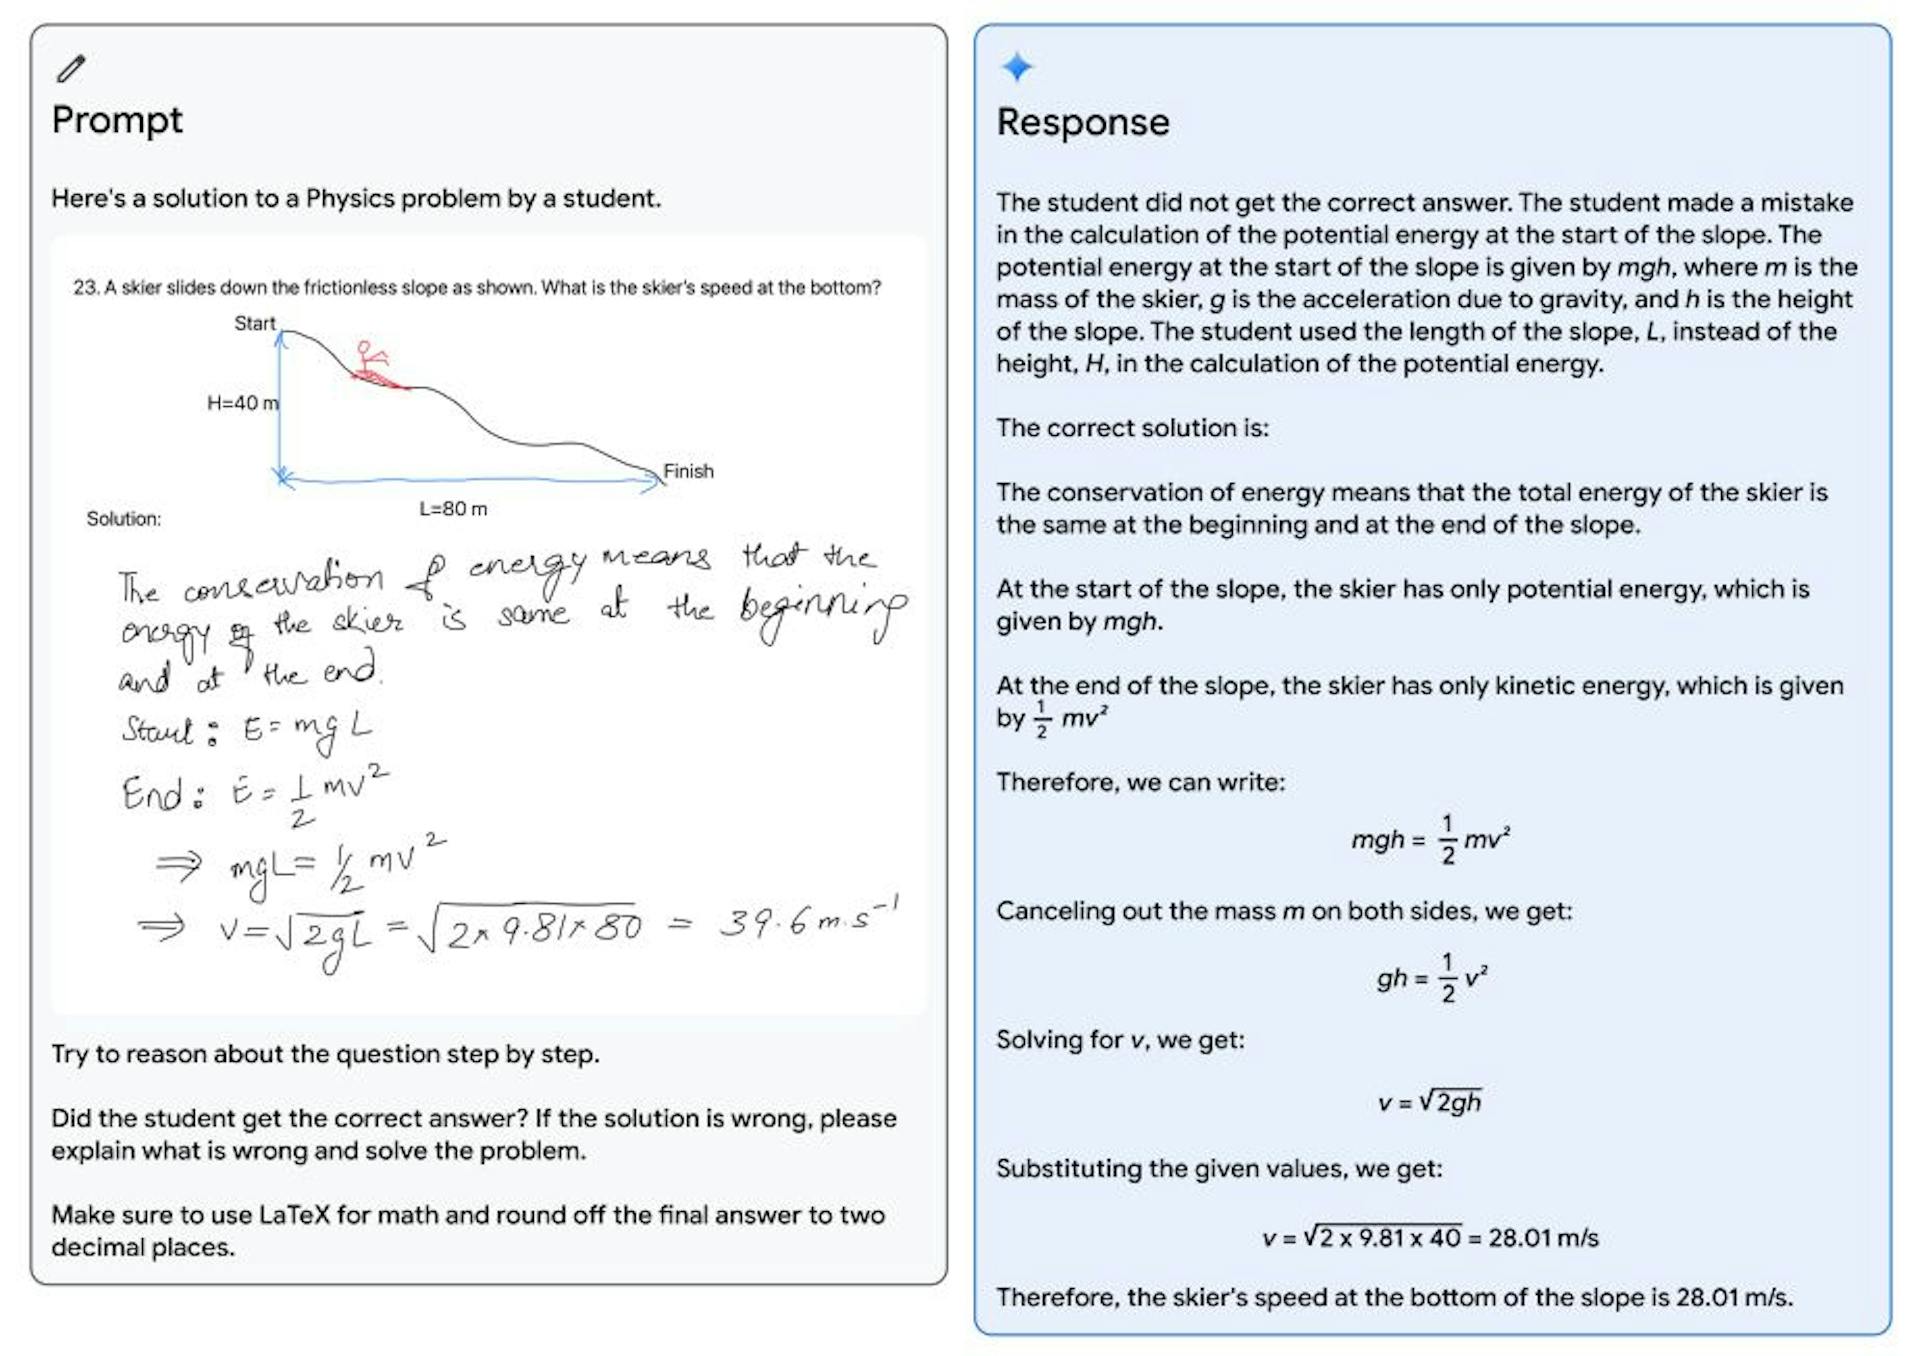 Figure 1 | Verifying a student’s solution to a physics problem. The model is able to correctly recognize all of the handwritten content and verify the reasoning. On top of understanding the text in the image, it needs to understand the problem setup and correctly follow instructions to generate LATEX.